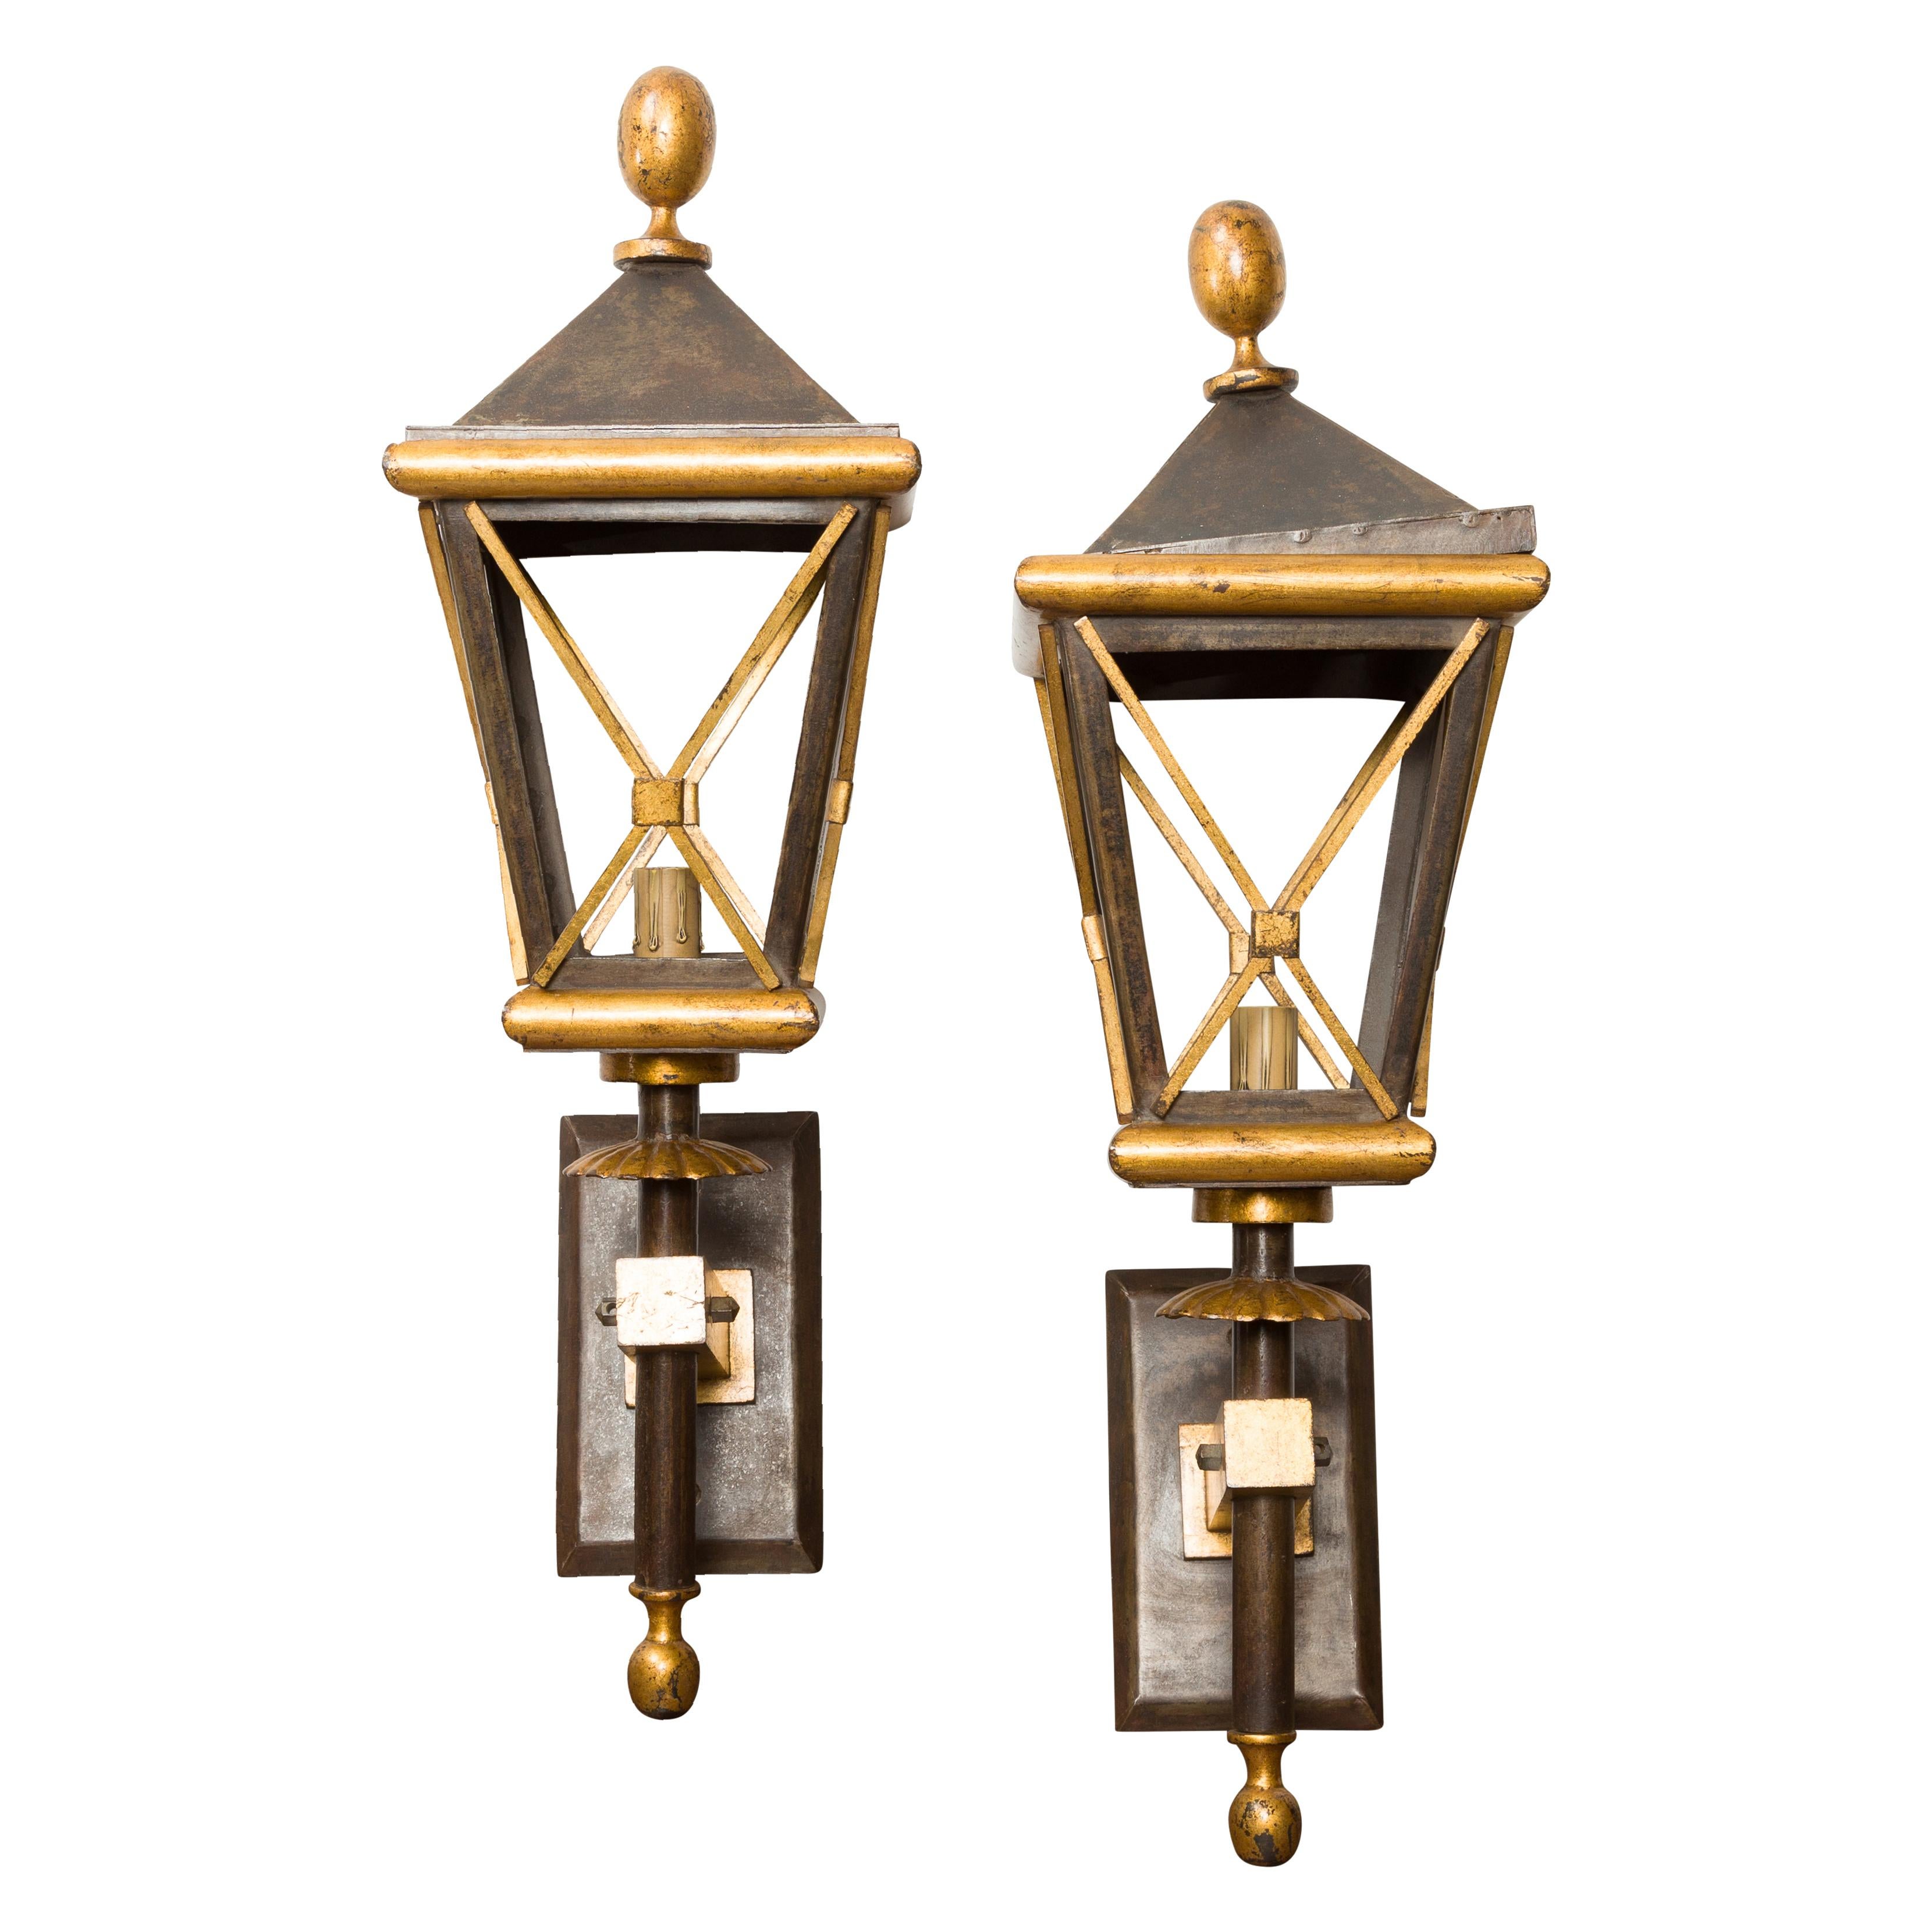 Pair of French Midcentury Gilt Iron Wall Mounted Lanterns with Single Lights